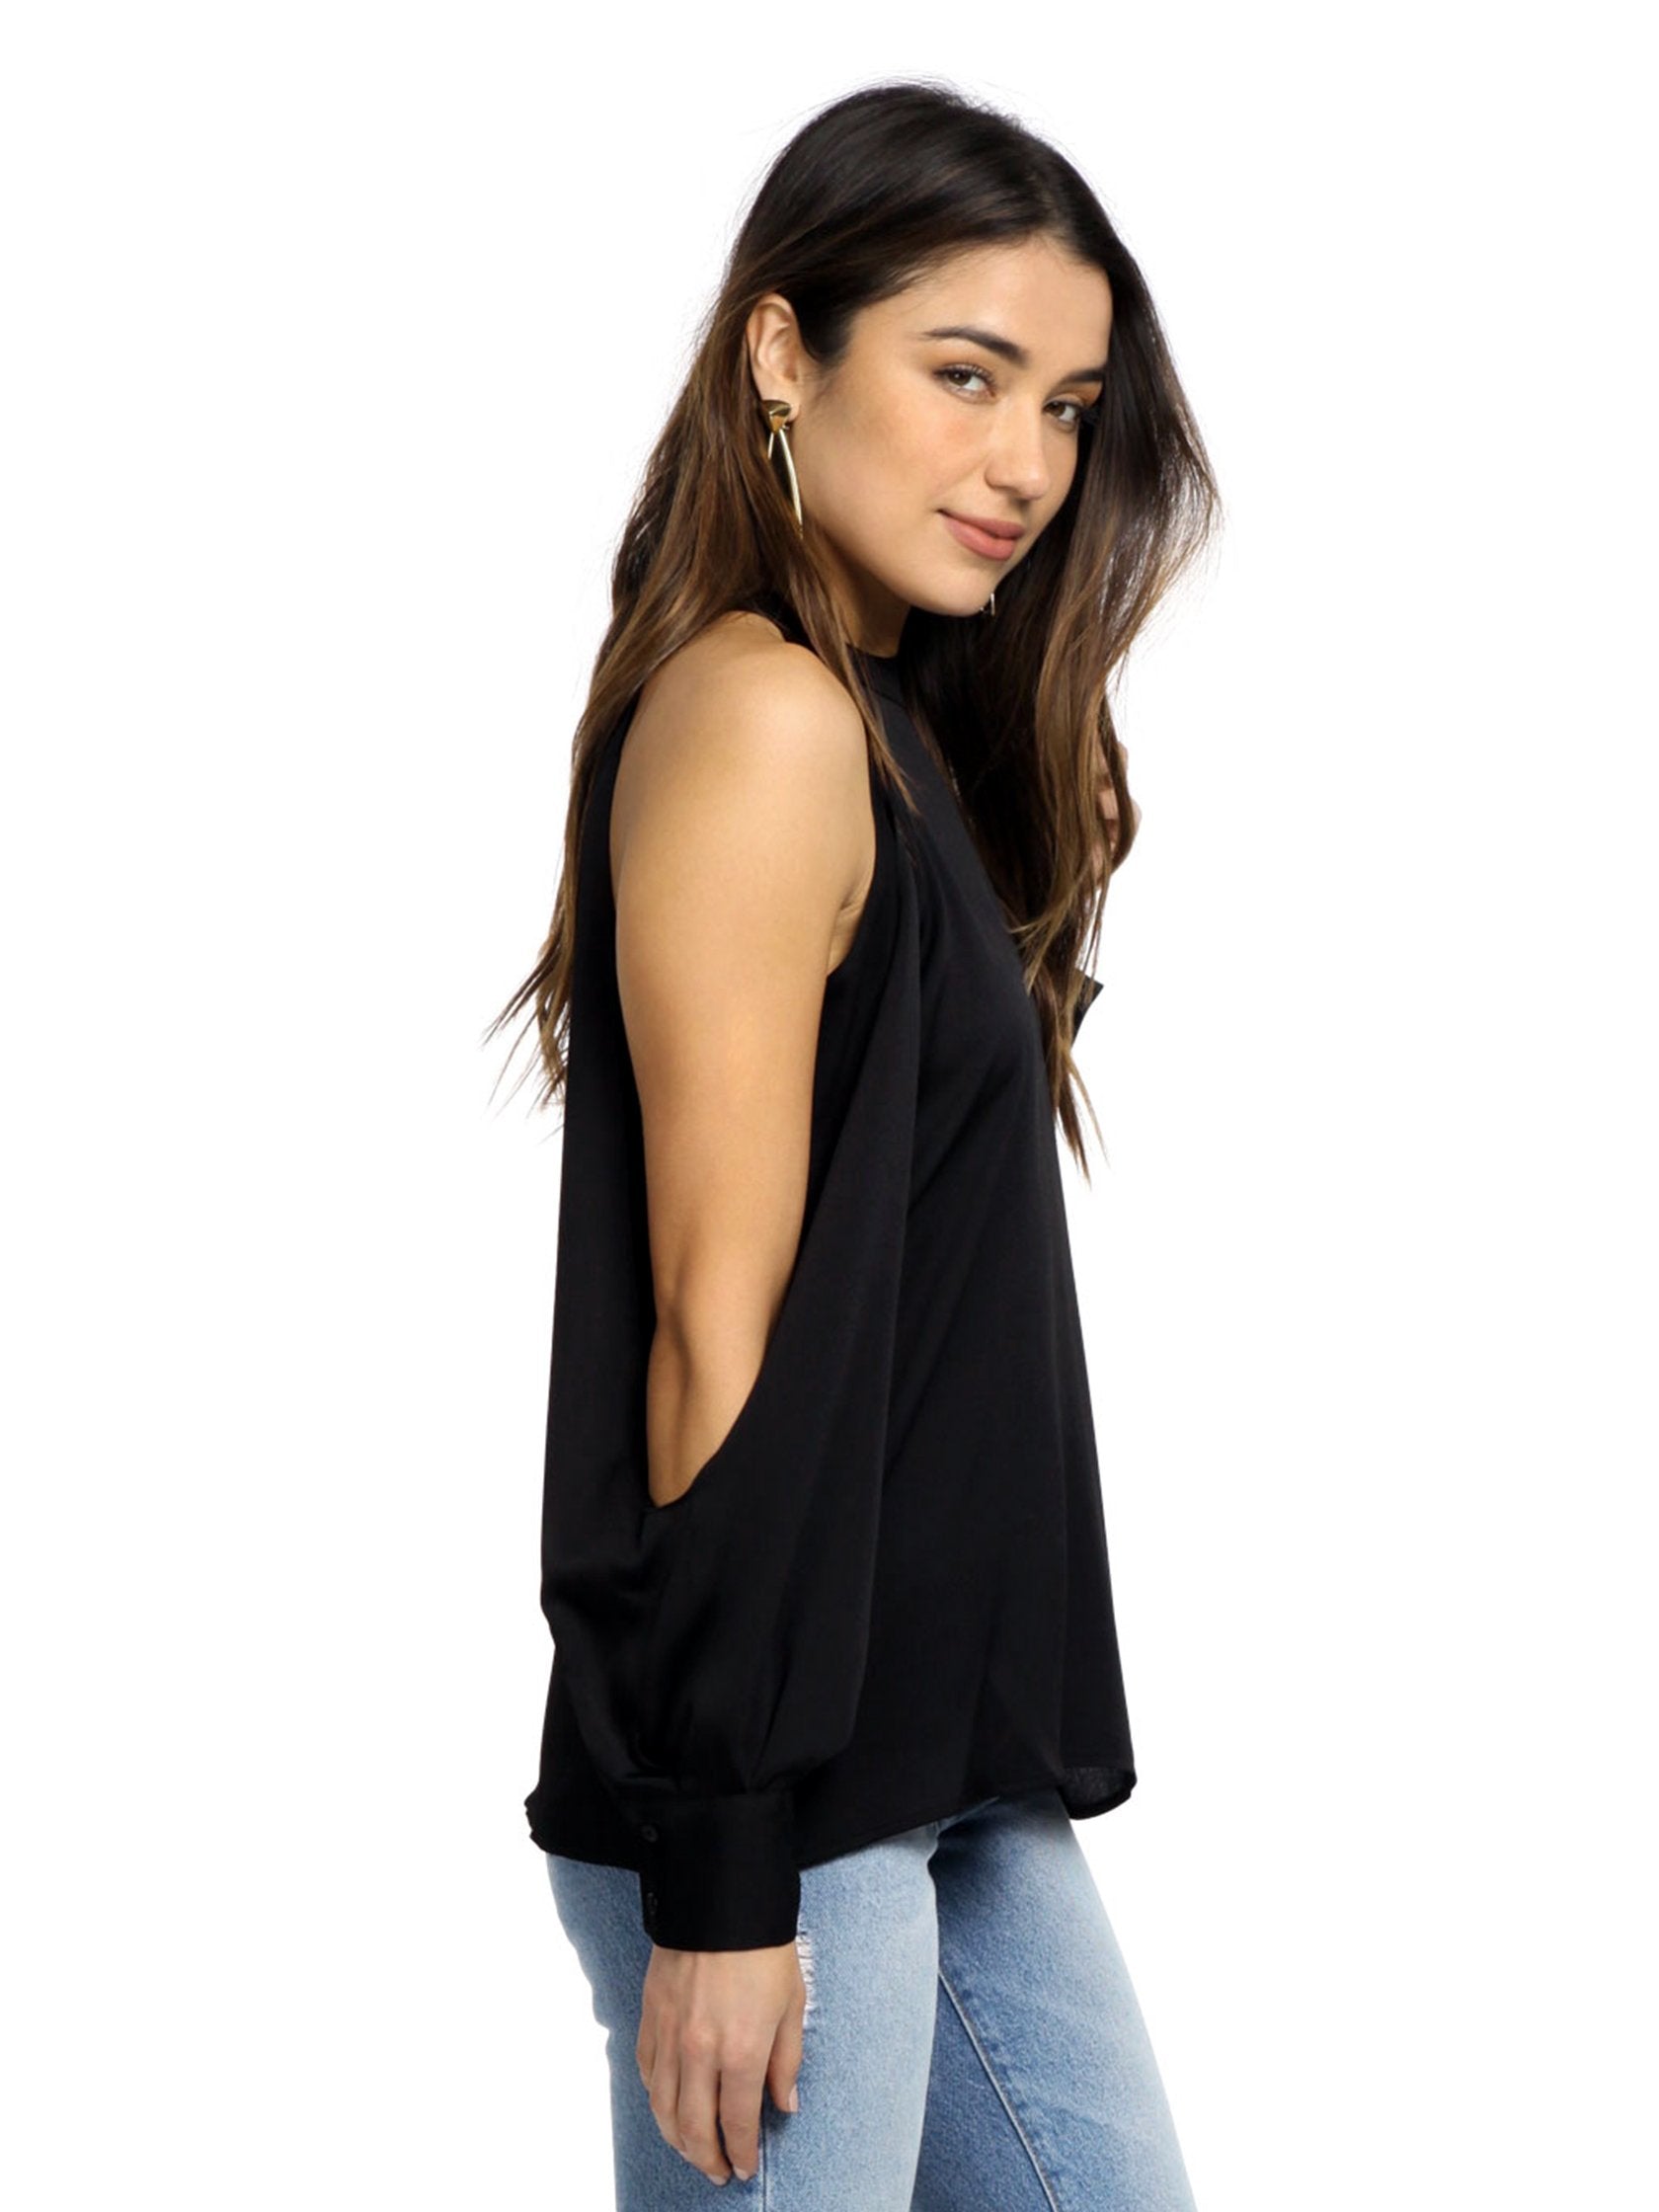 Women wearing a top rental from 1.STATE called Cold Shoulder Blouson Sleeve Blouse